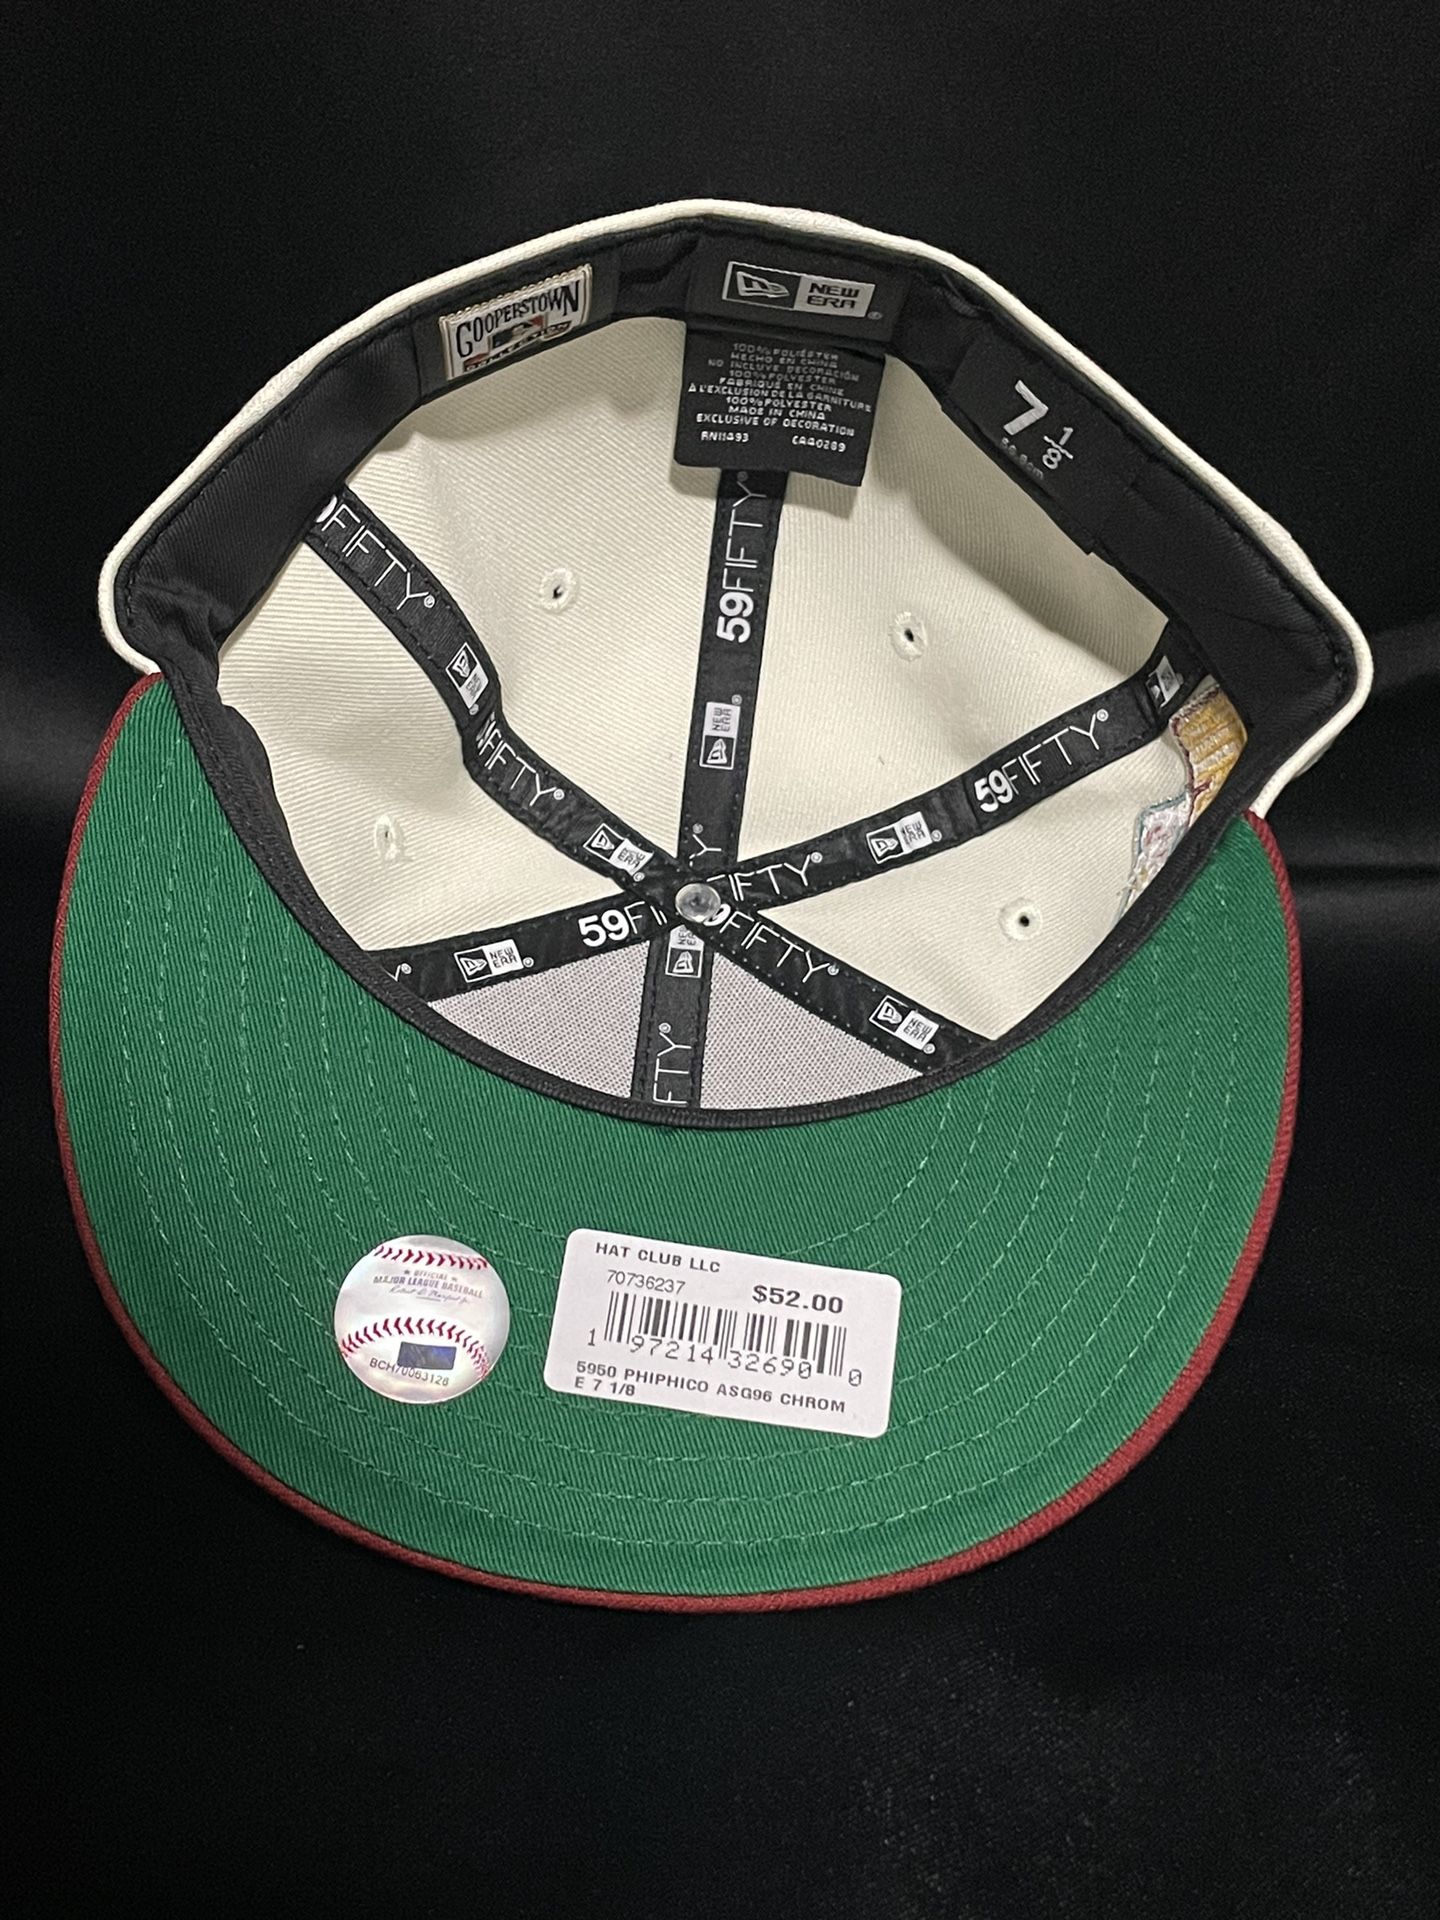 Philadelphia Phillies Cooperstown Collection SnapBack Hat for Sale in  Pembroke Pines, FL - OfferUp